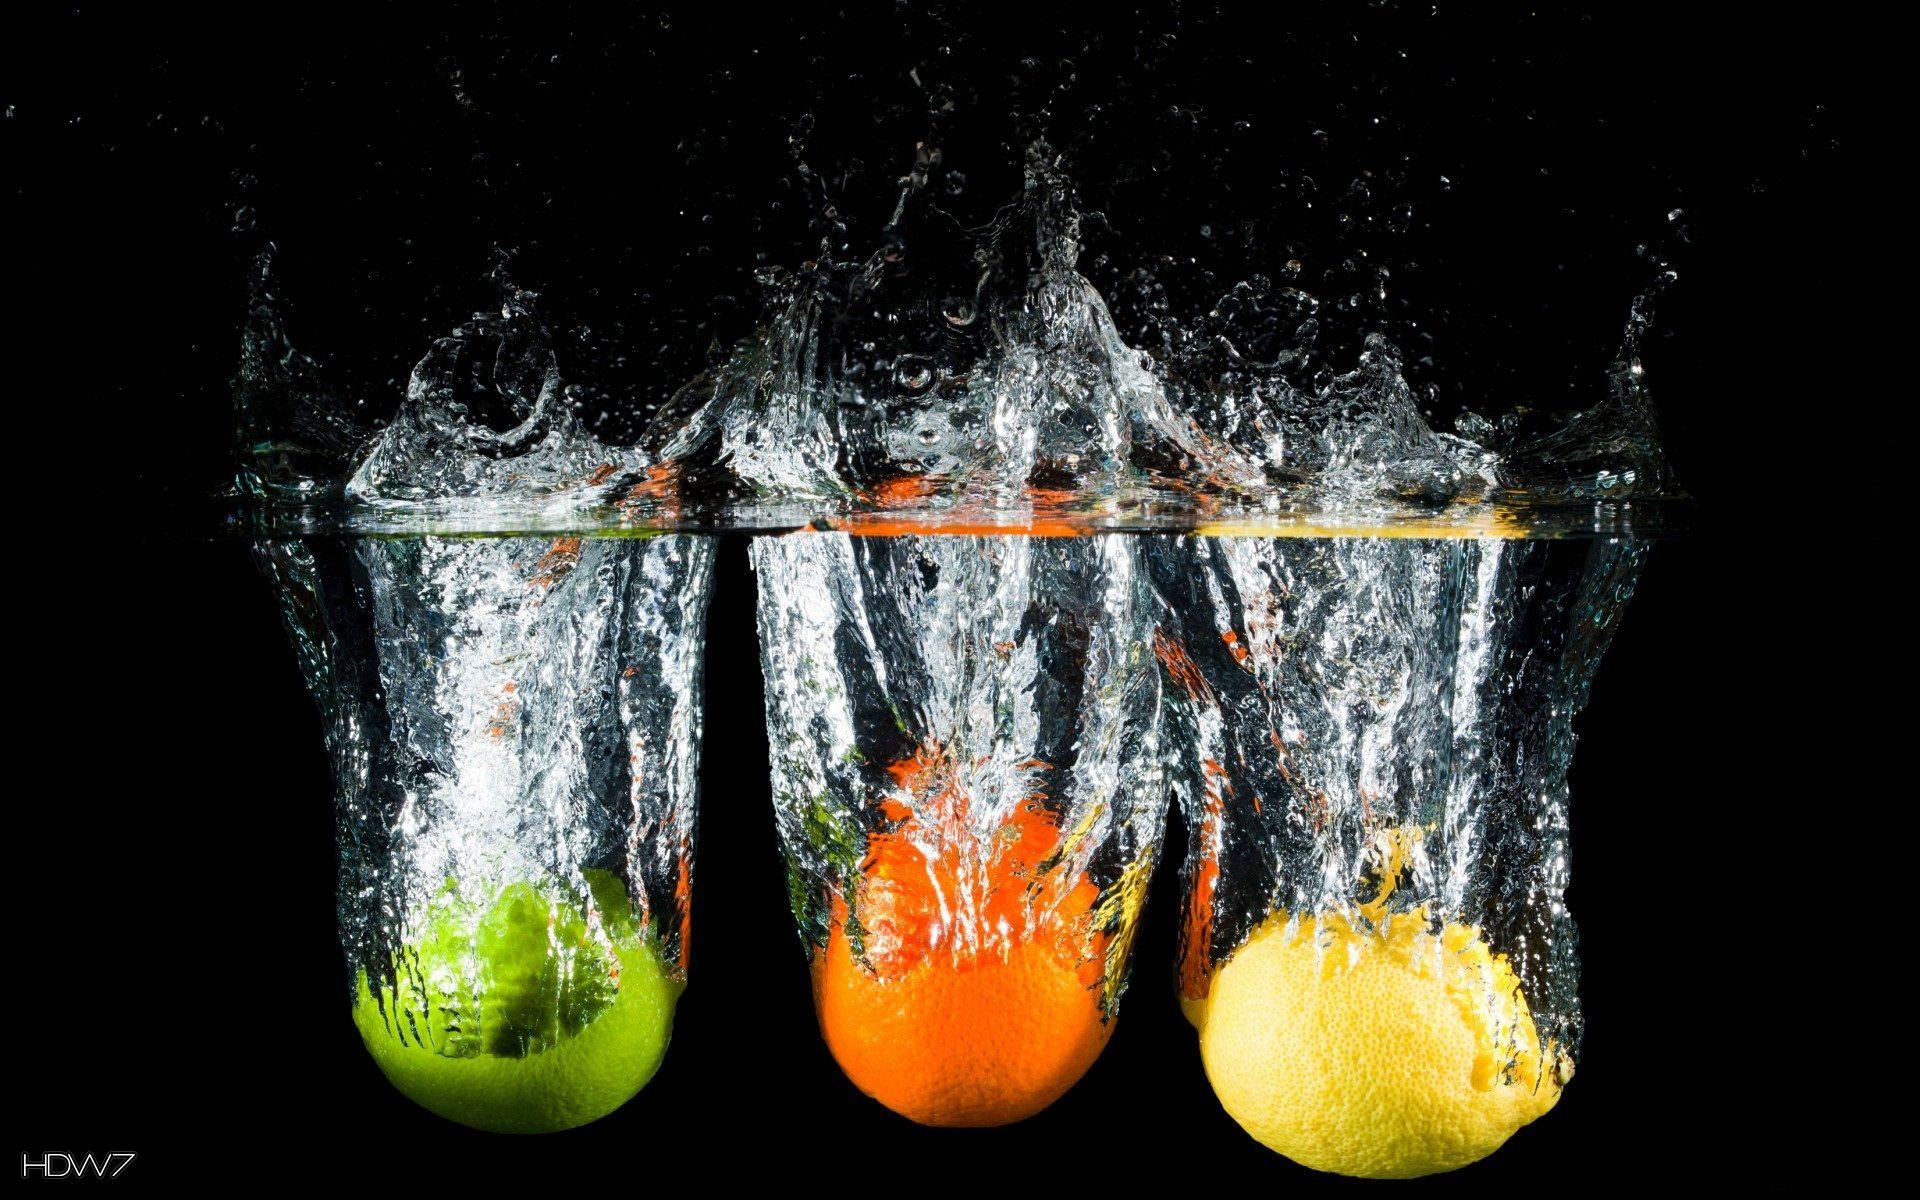 citrus fruits in water black background. HD wallpaper gallery